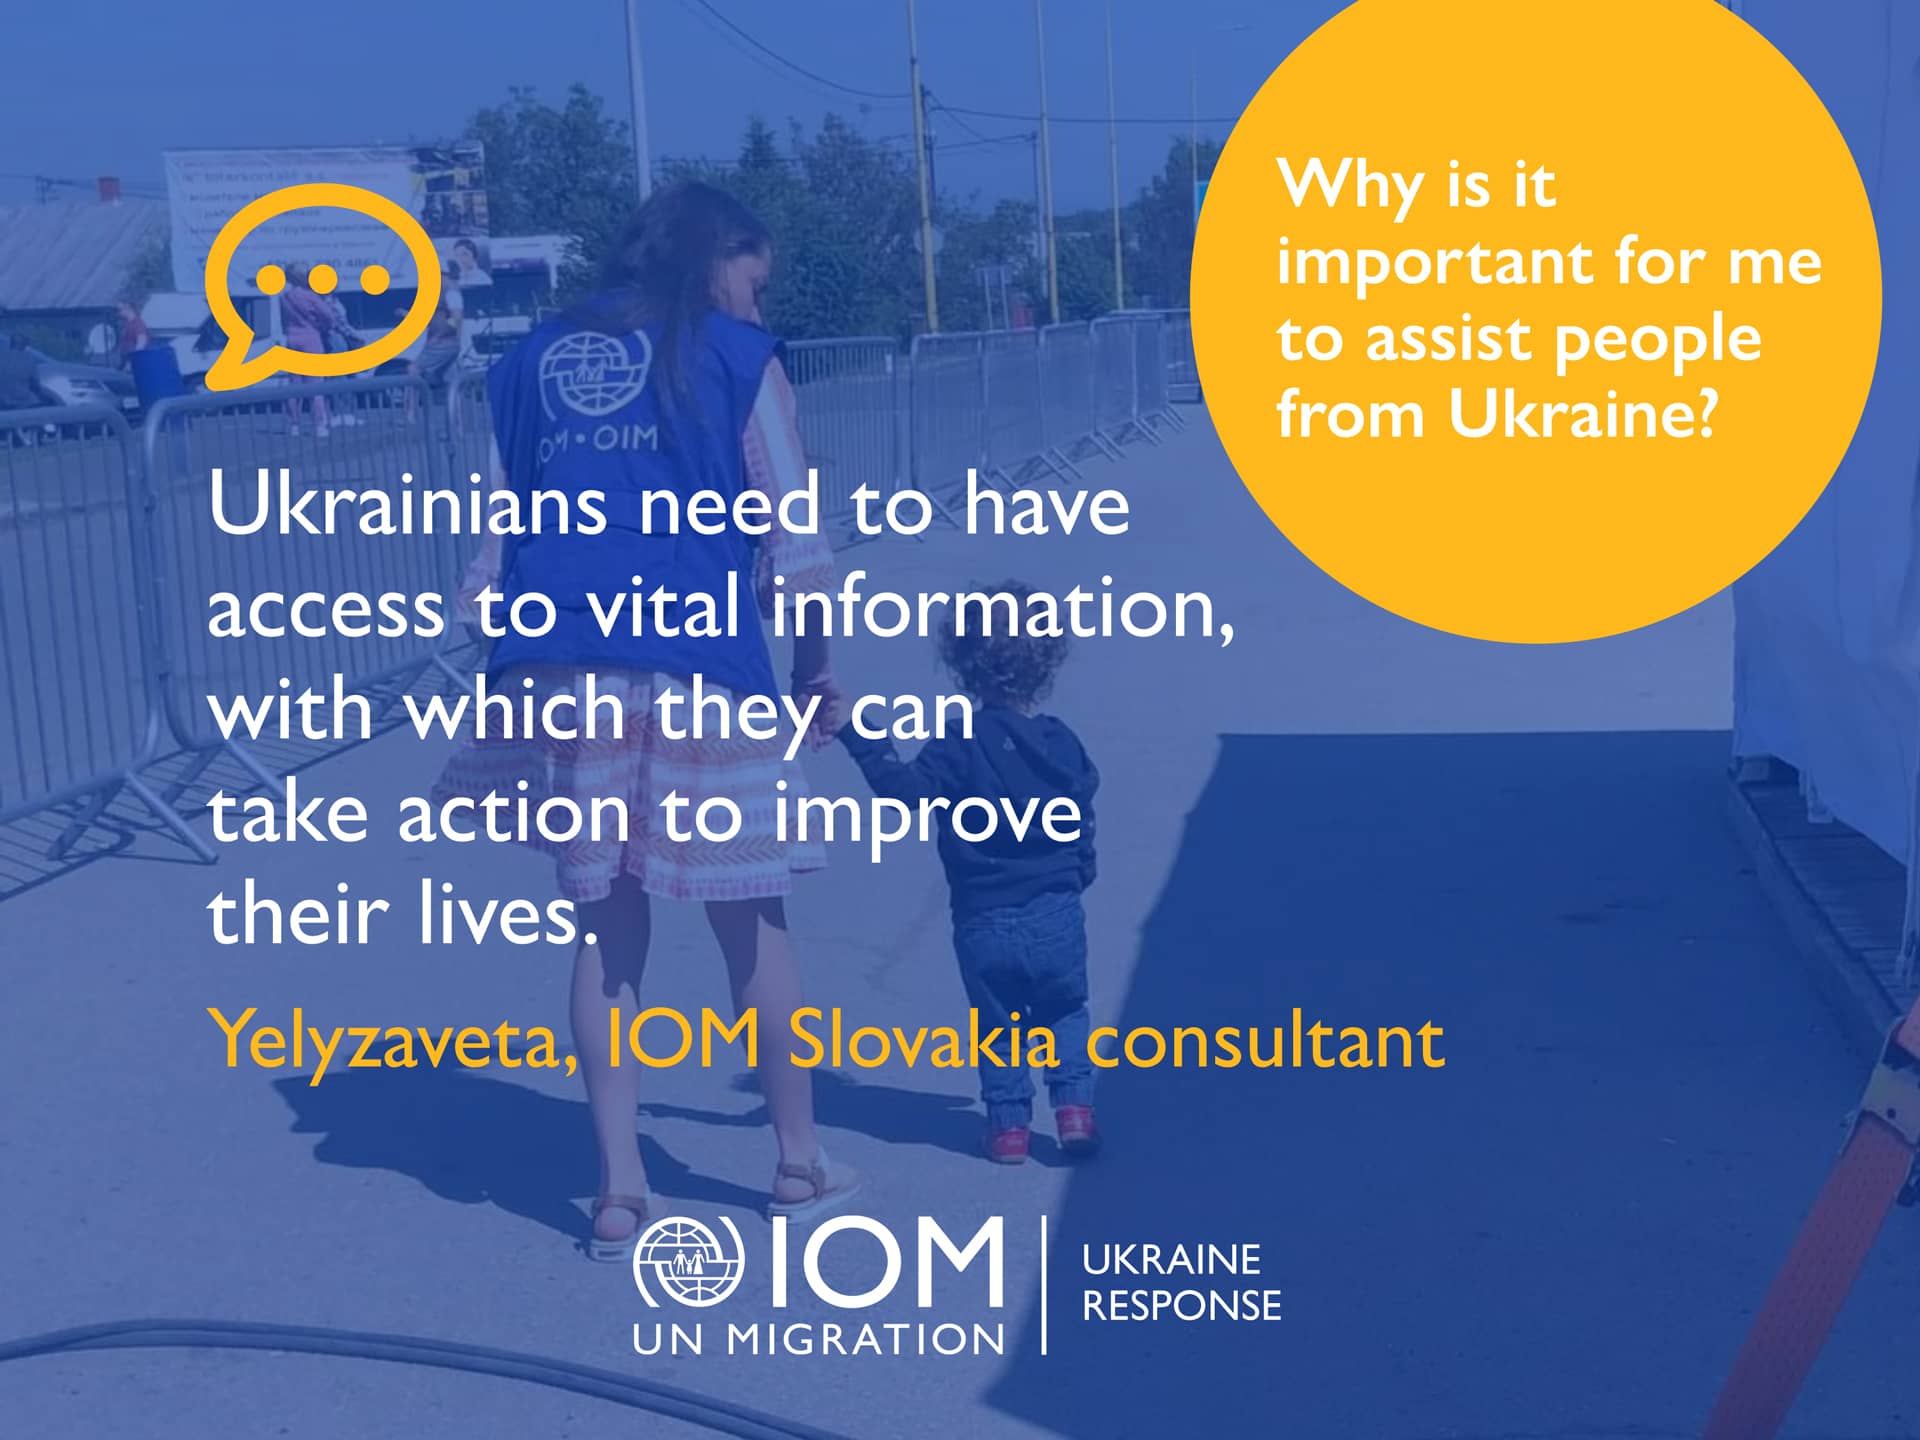 Yelyzaveta, IOM Slovakia consultant - Why is it important for me to assist people from Ukraine